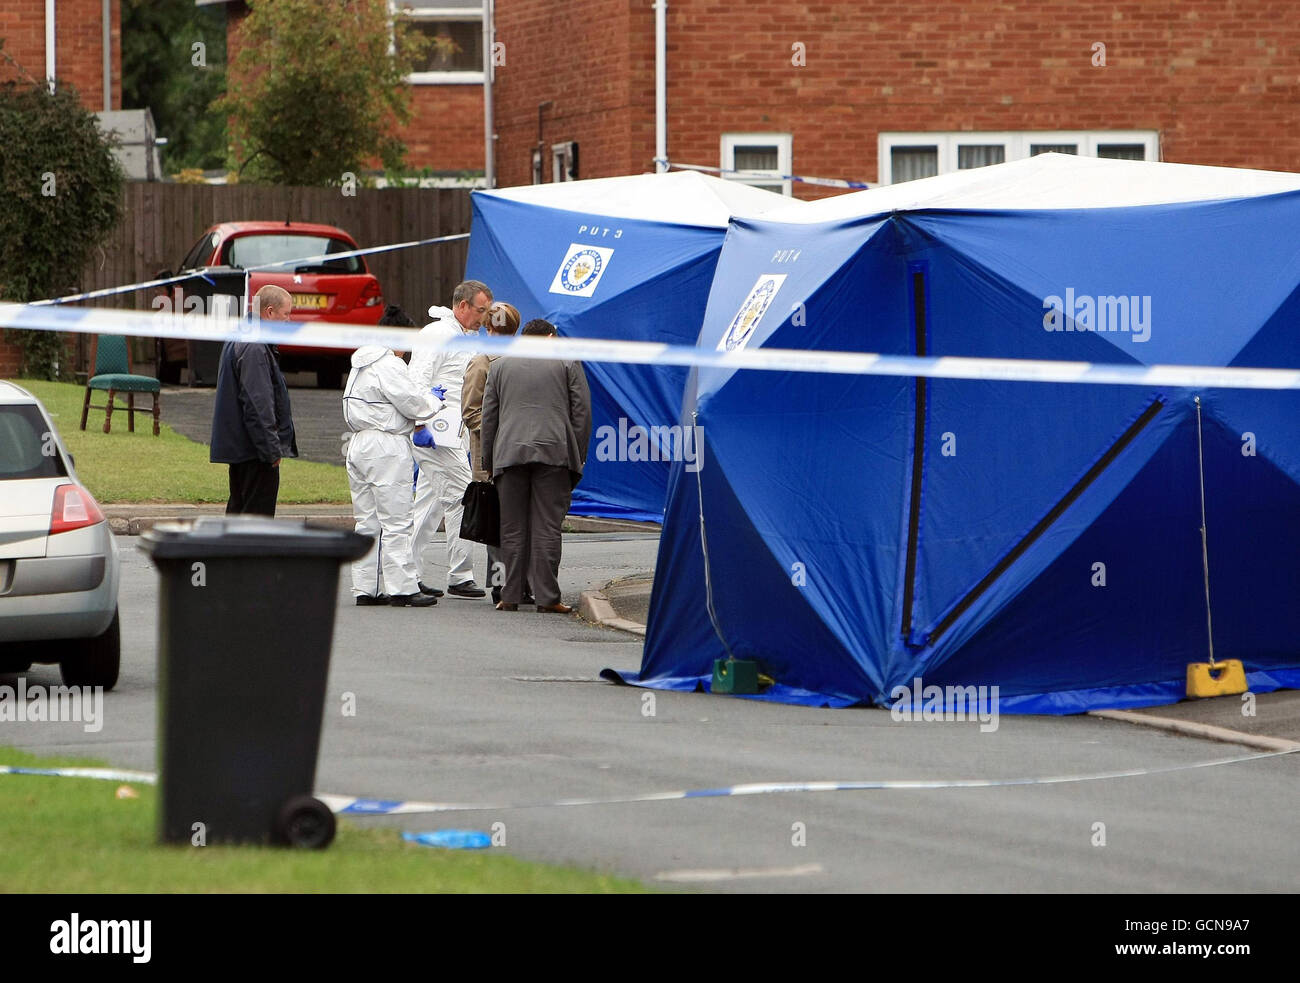 Police officers examine the scene of a murder after a man was stabbed to death. West Midlands Police said two other men also suffered stab wounds during the incident in Crosby Close, Whitmore Reans, Wolverhampton at about 10.45pm yesterday. Stock Photo